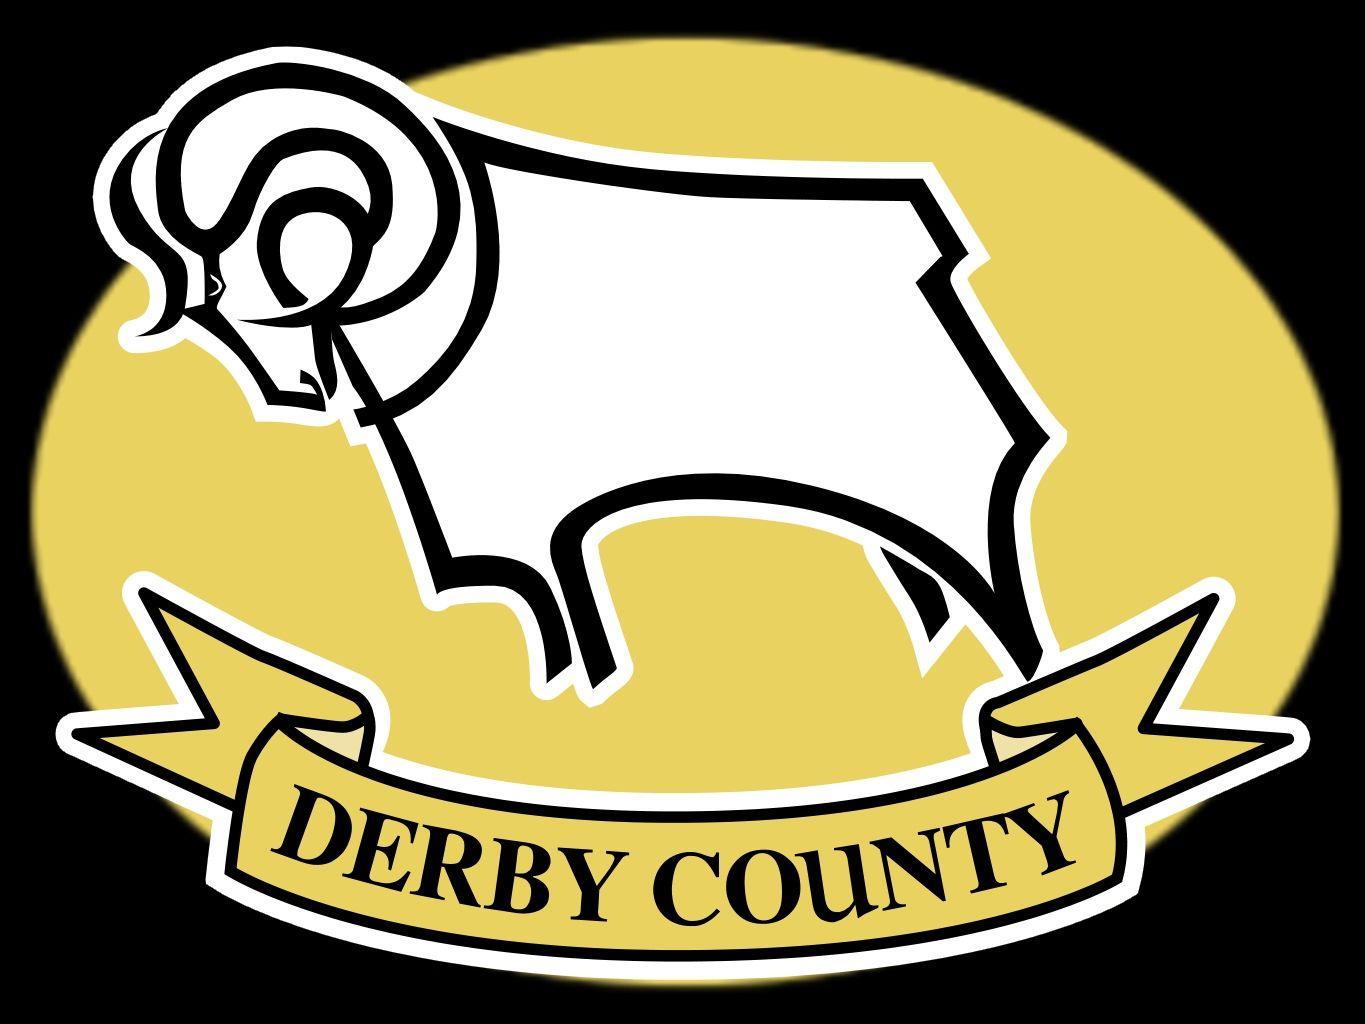 derby county wallpapers wallpaper cave derby county wallpapers wallpaper cave